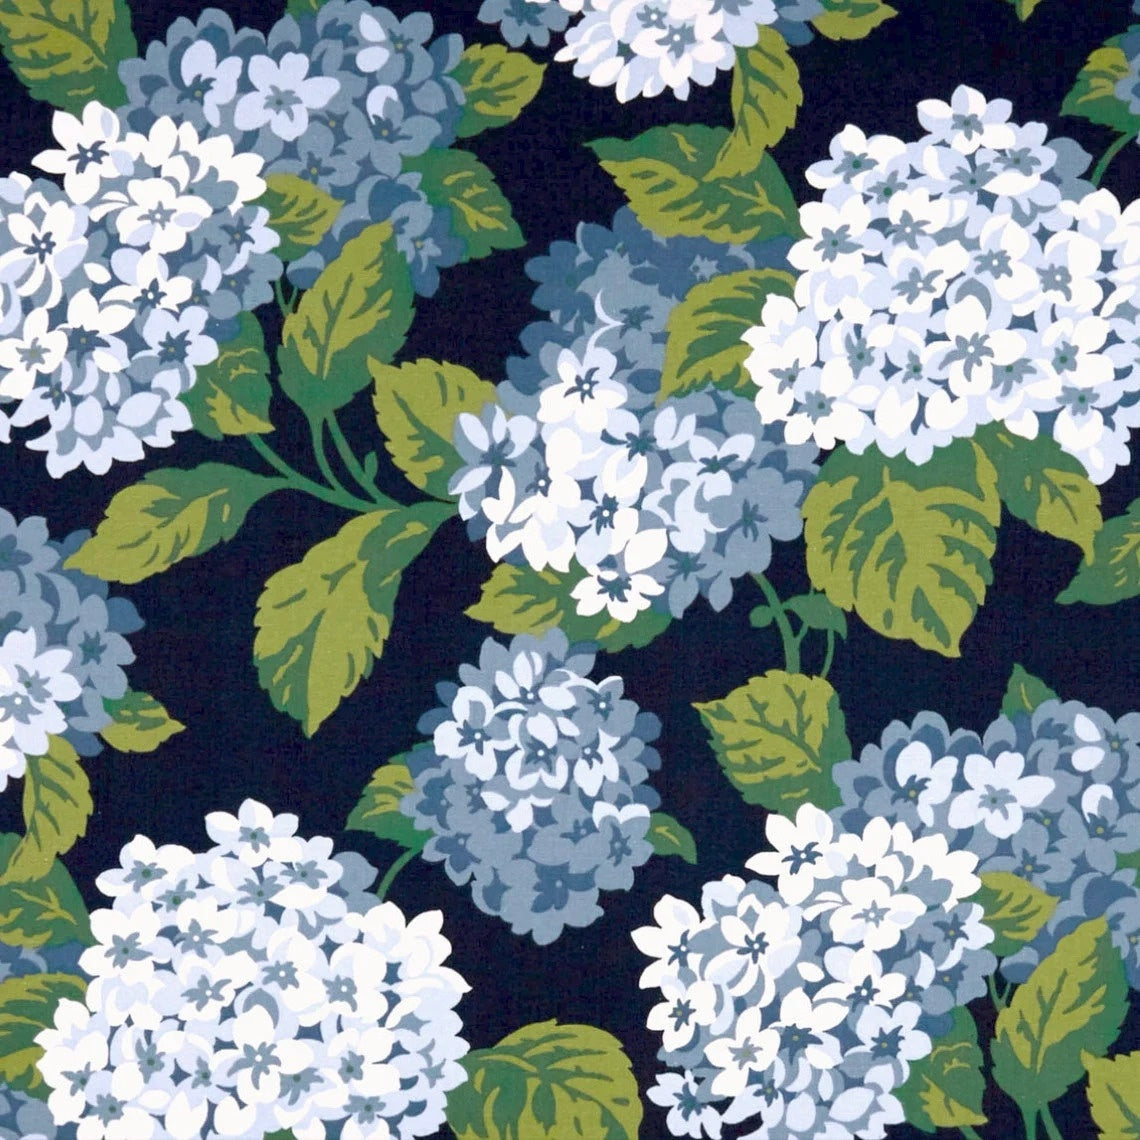 pinch pleated curtains in summerwind navy blue hydrangea floral, large scale